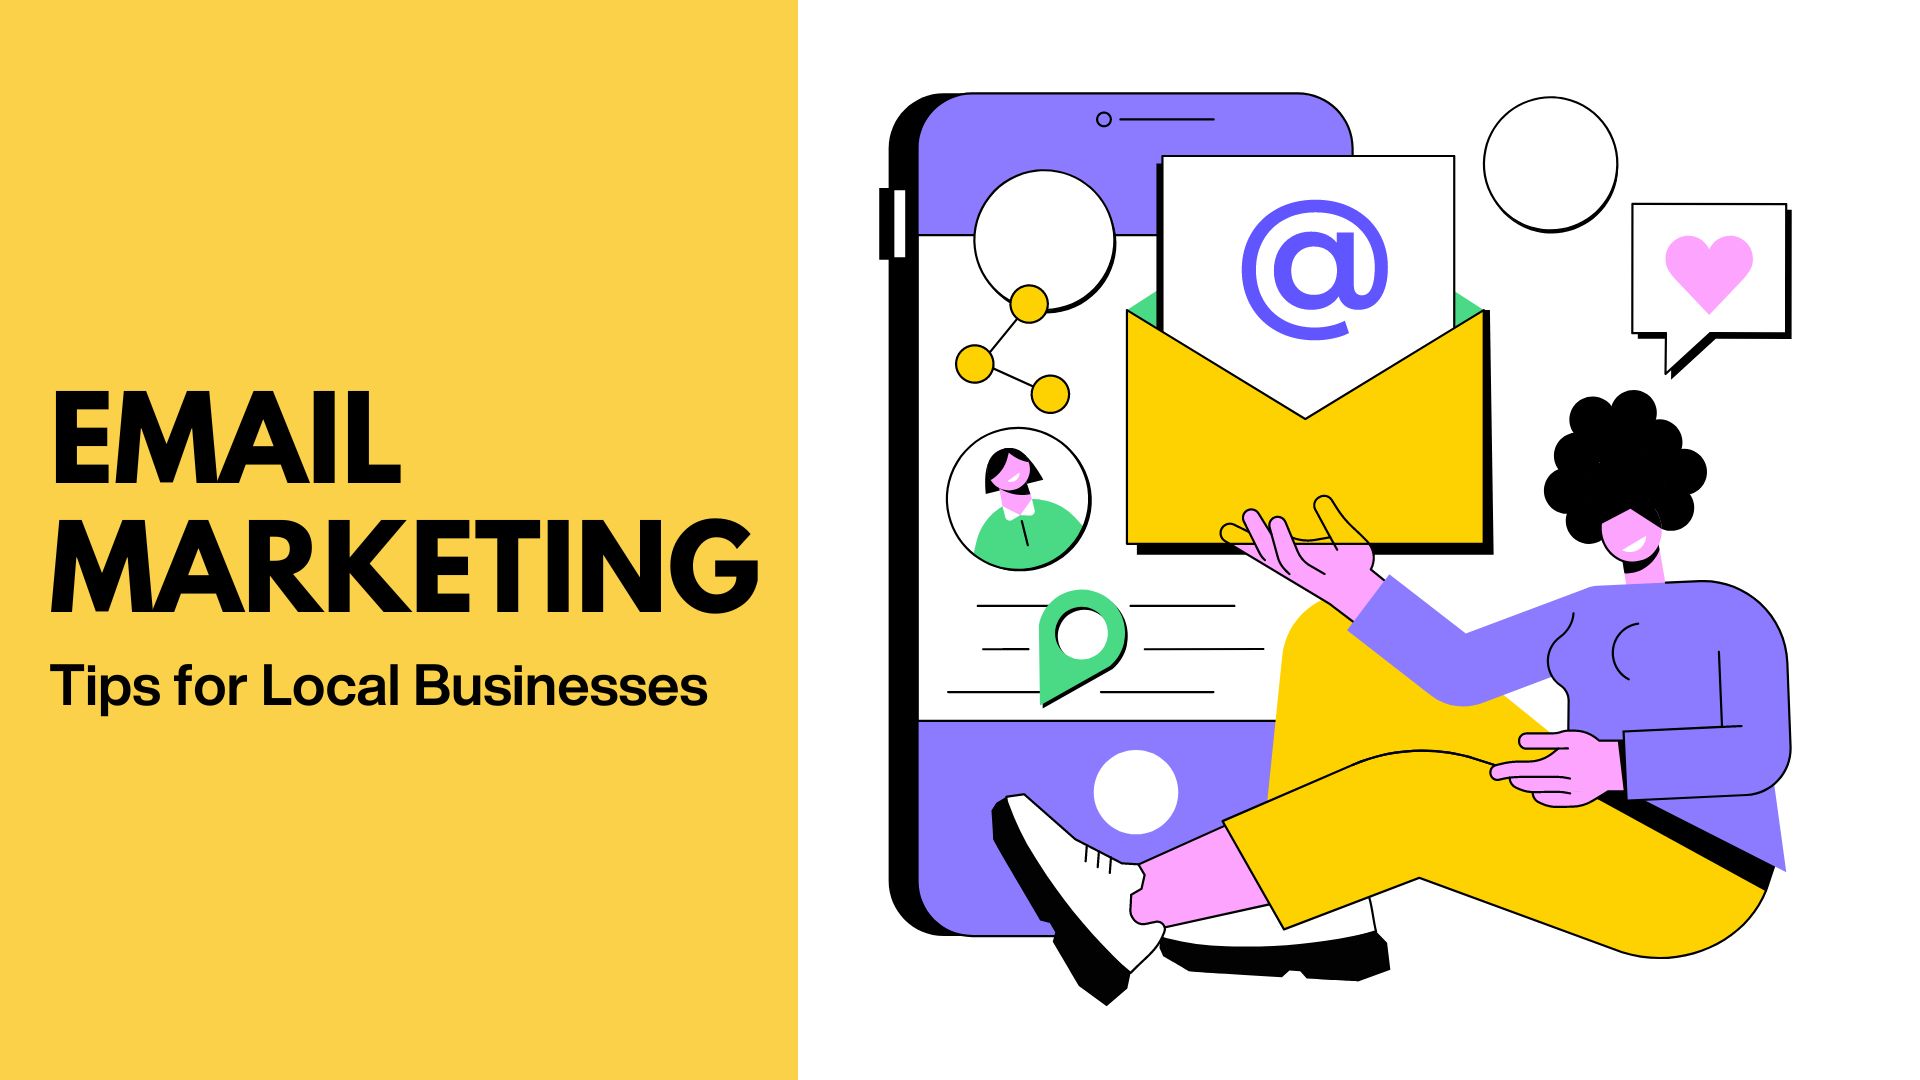 Email Marketing for local businesses